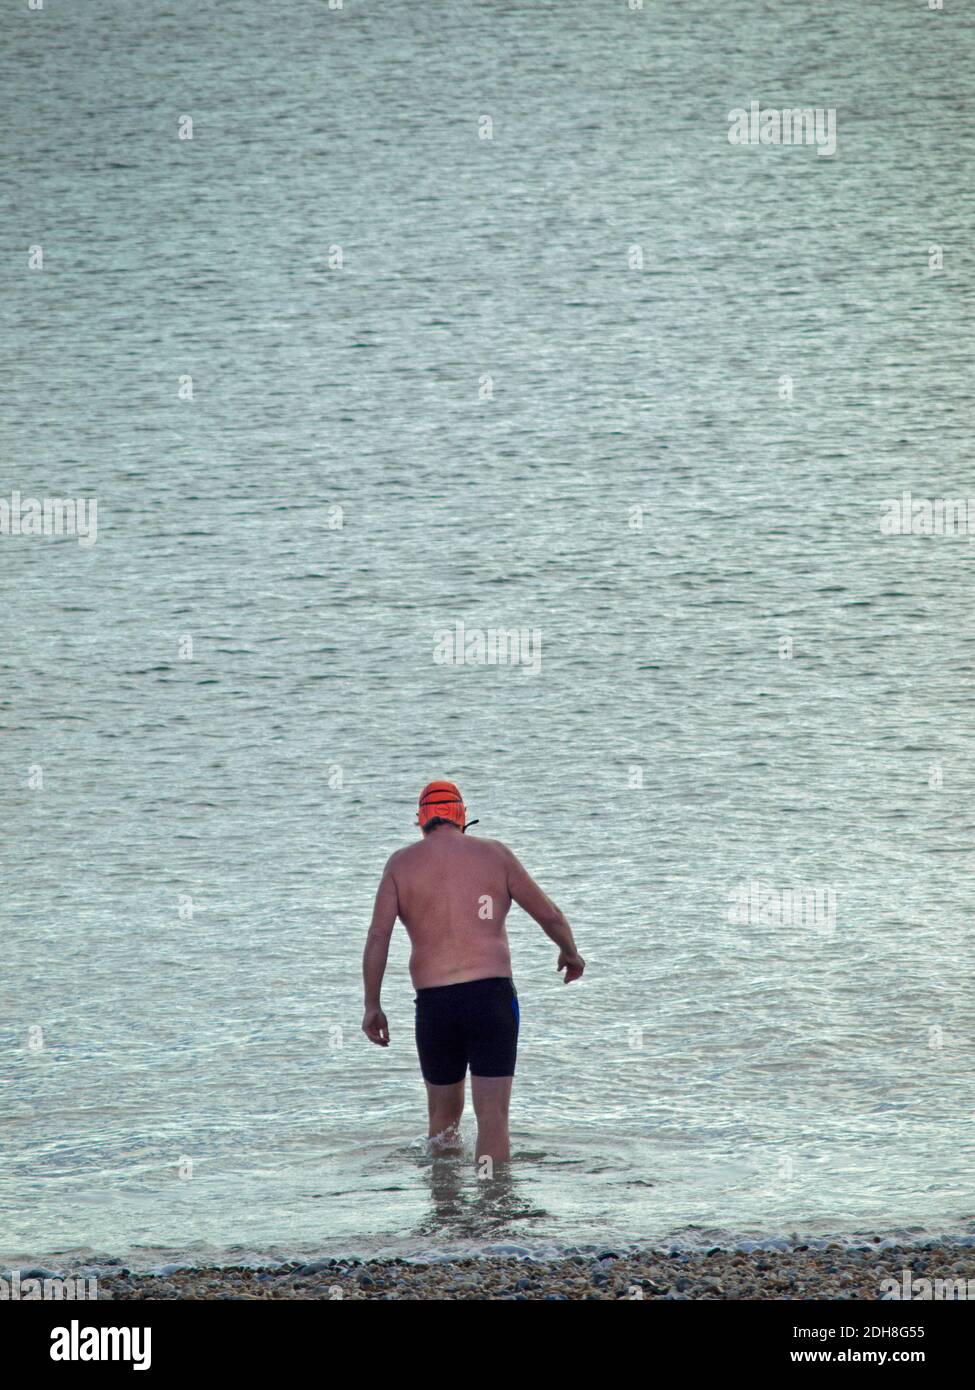 A swimmer enters the sea at Brighton, England Stock Photo